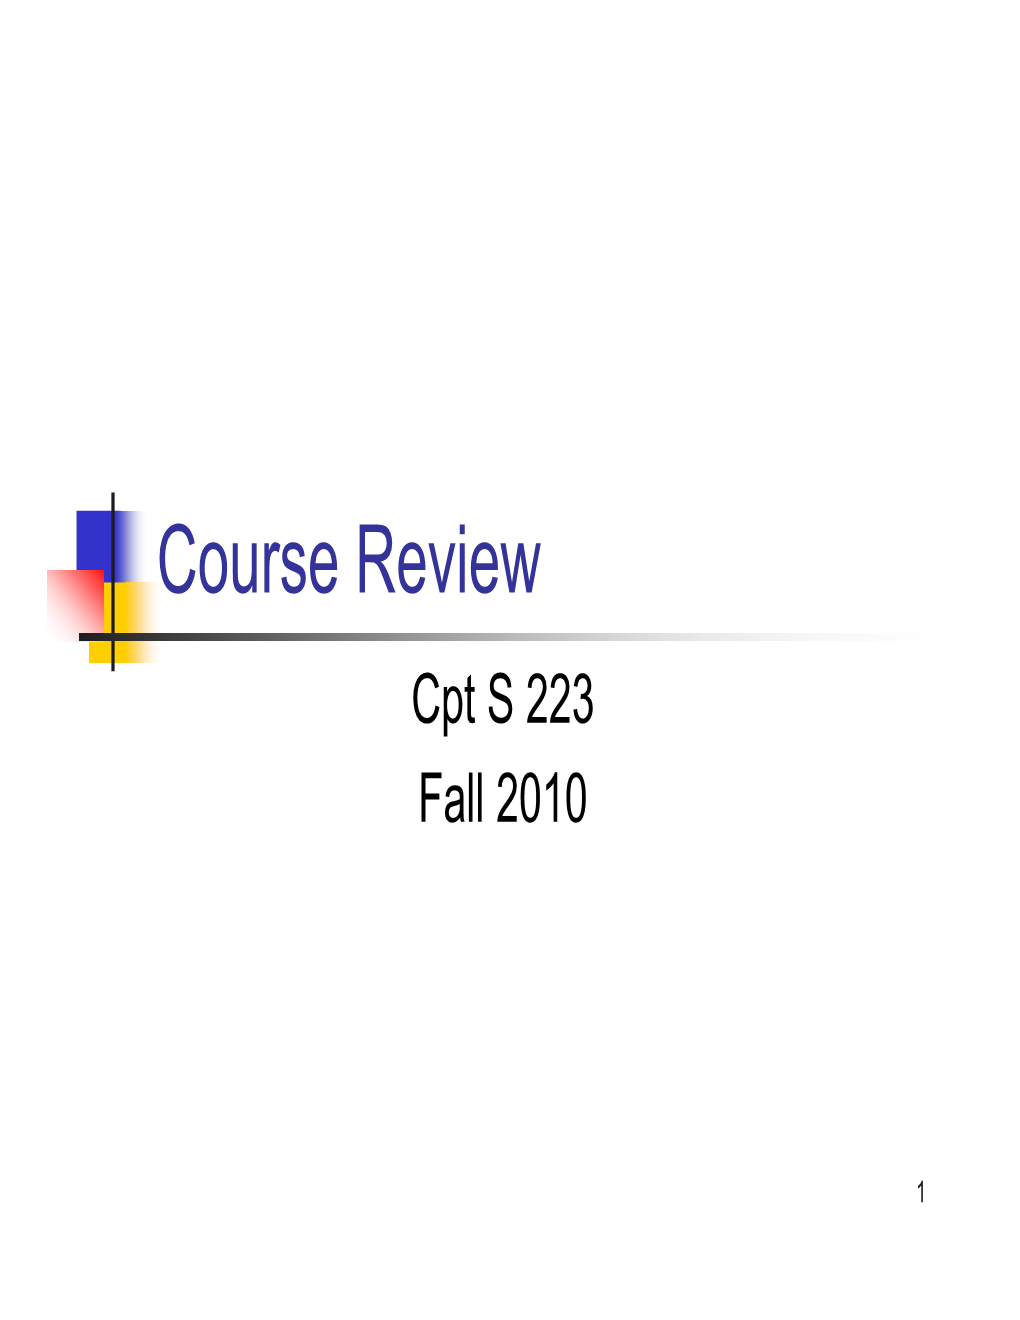 Course Review Cpt S 223 Fall 2010